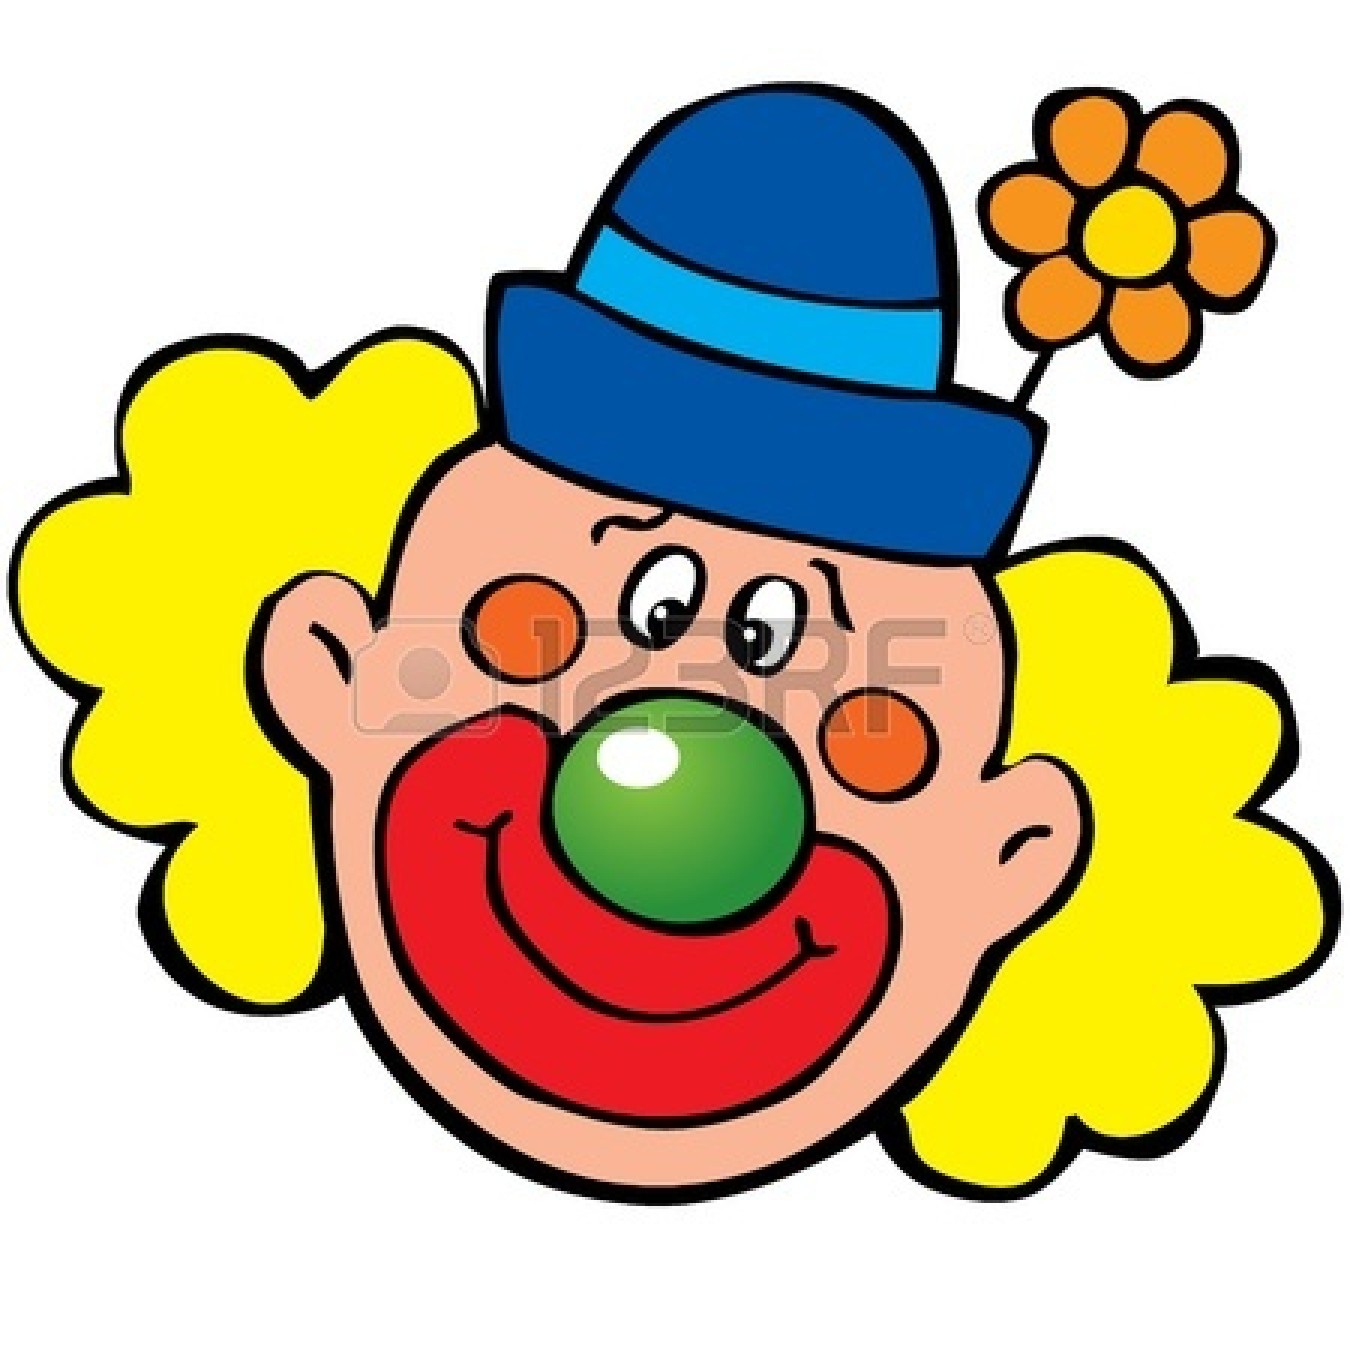 Clown clipart easy, Clown easy Transparent FREE for download